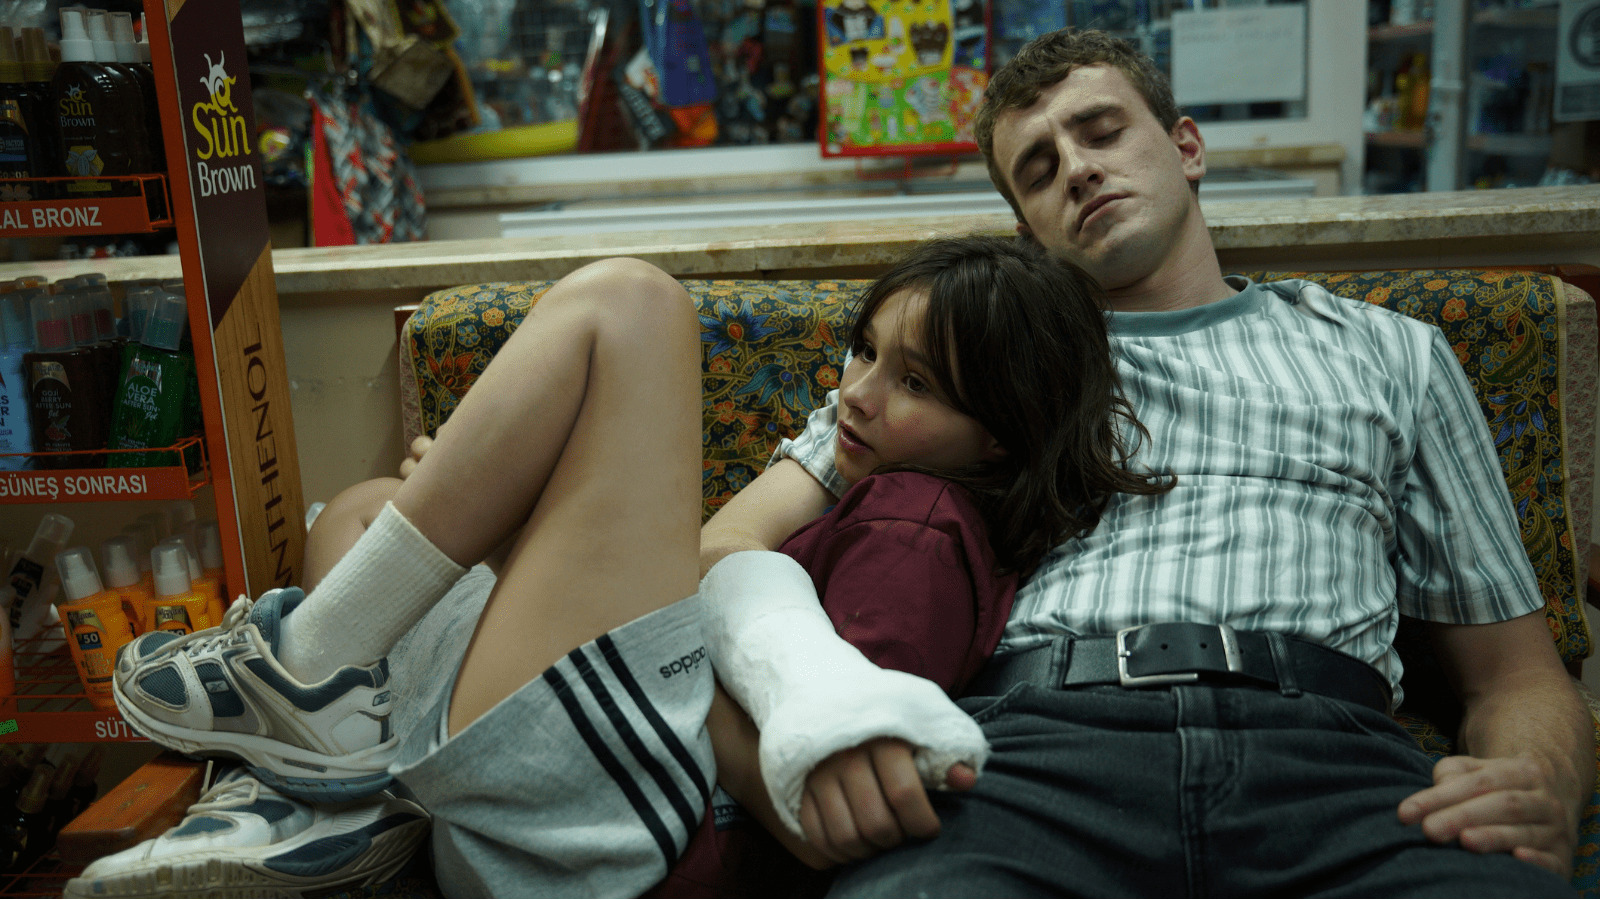 A man with a broken wrist in a cast holds a young girl, his daughter, as they lie on a sofa - this is a still from Aftersun, with Paul Mescal and Frankie Corio playing father and daughter respectively